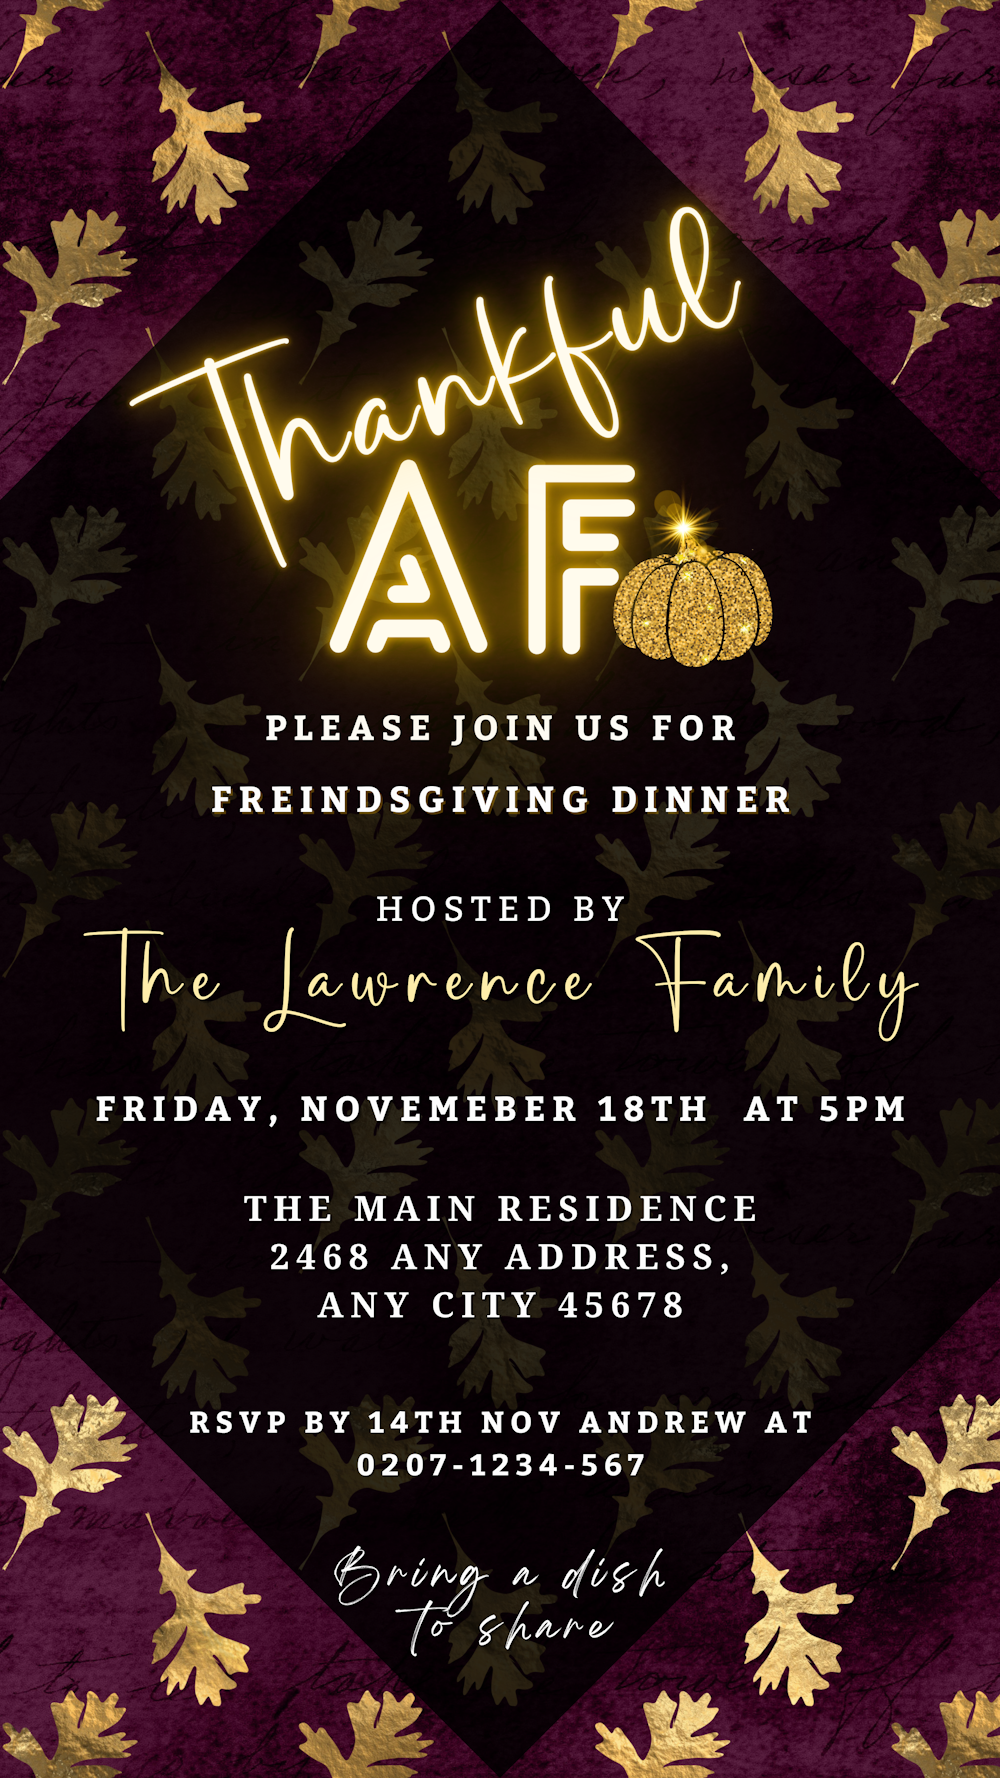 Purple and gold Thanksgiving evite featuring maroon and gold falling leaves with customizable text, font style, and color options through Canva.